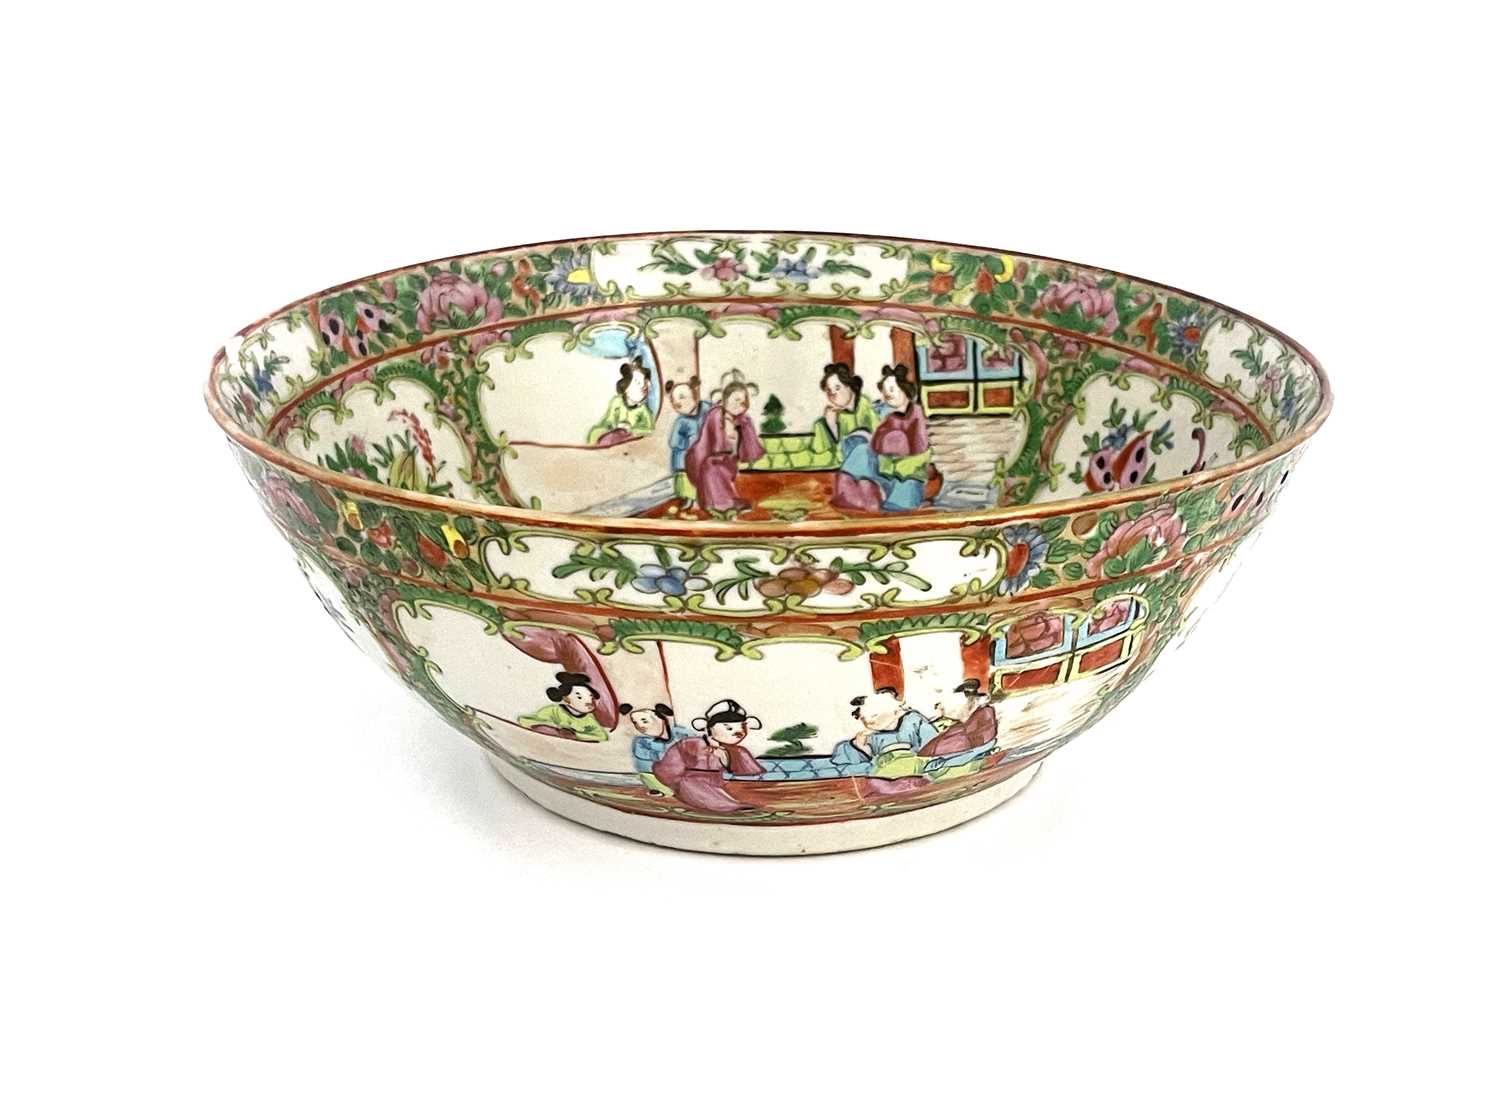 A Chinese Canton Famille rose bowl, Qing Dynasty, 19th Century, decorated with panels of narrative